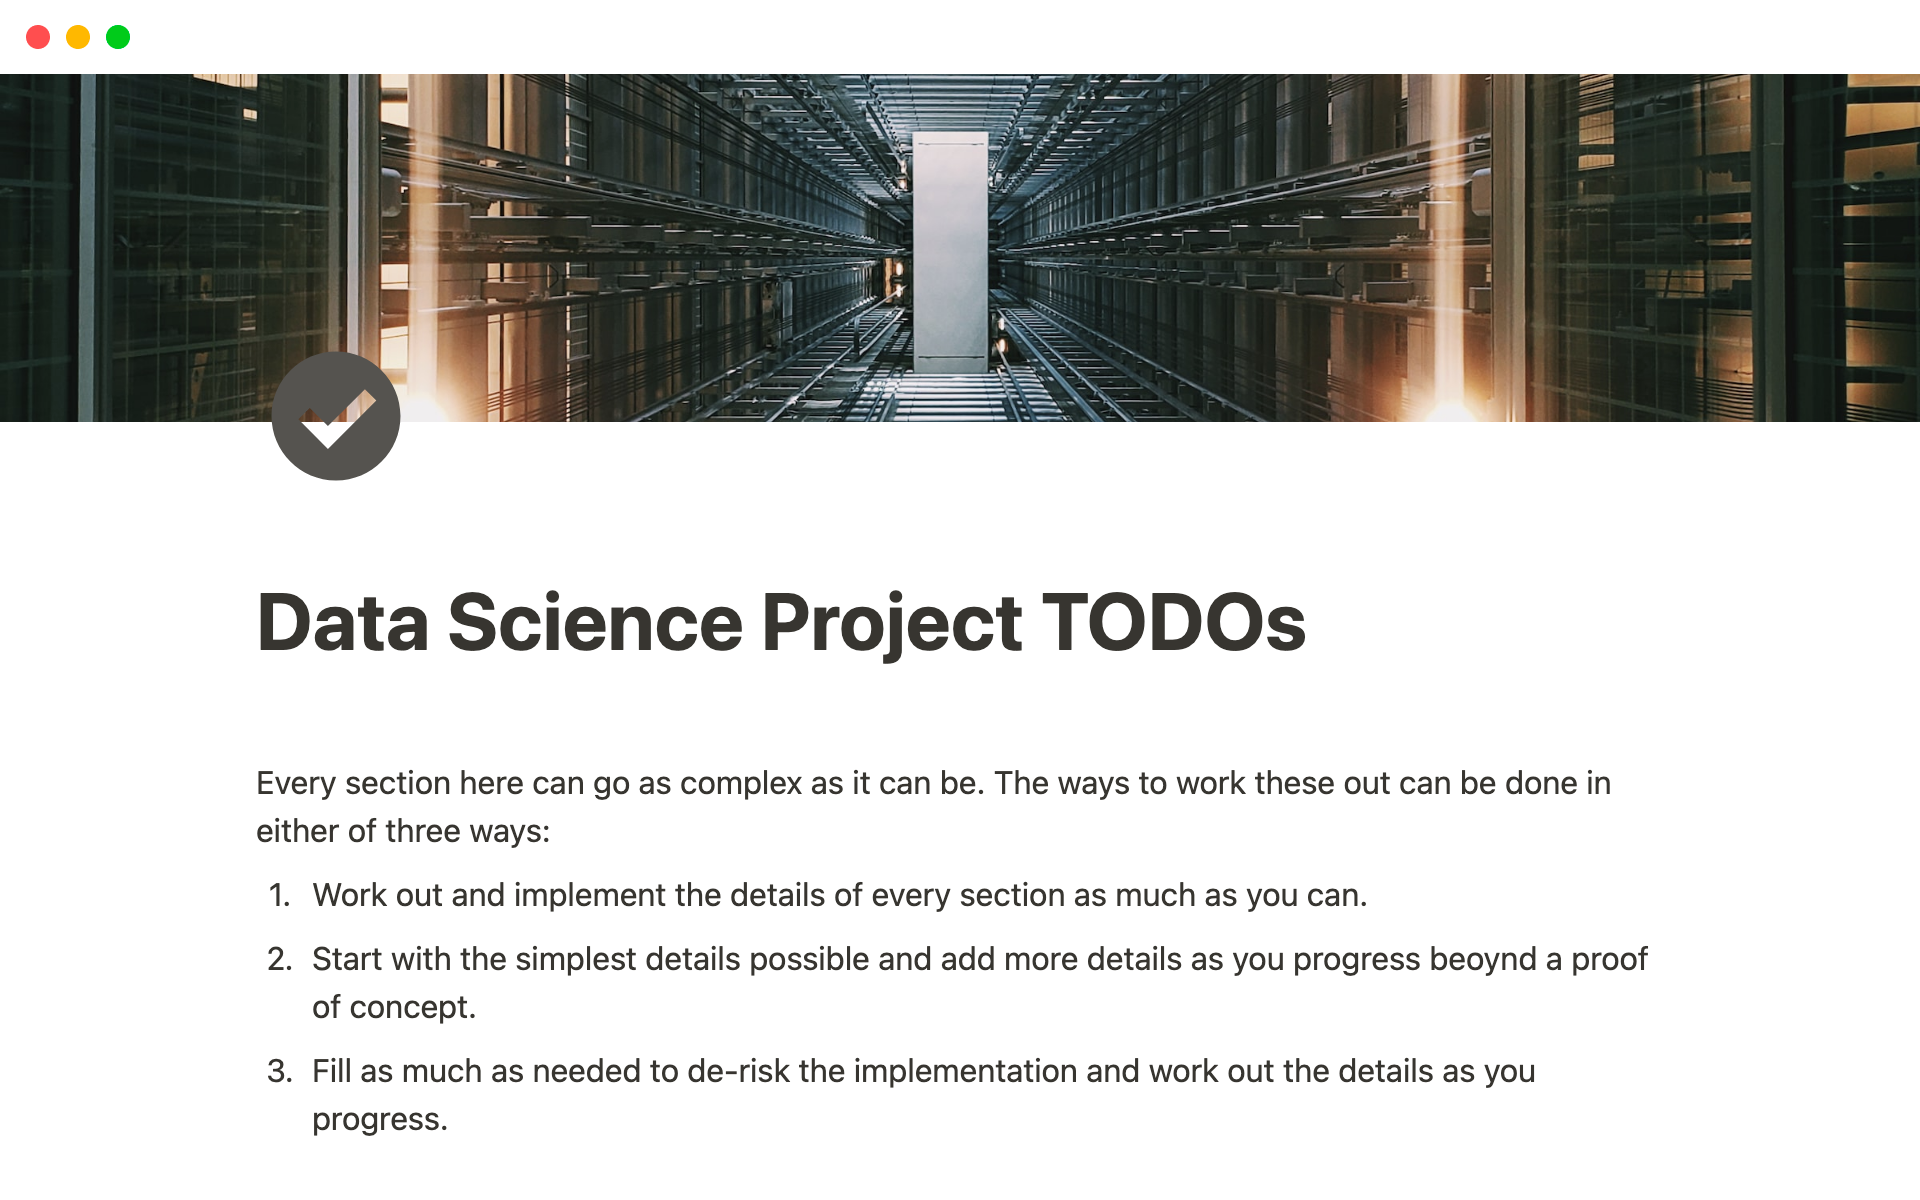 ToDo lists for an effective Data Science project.